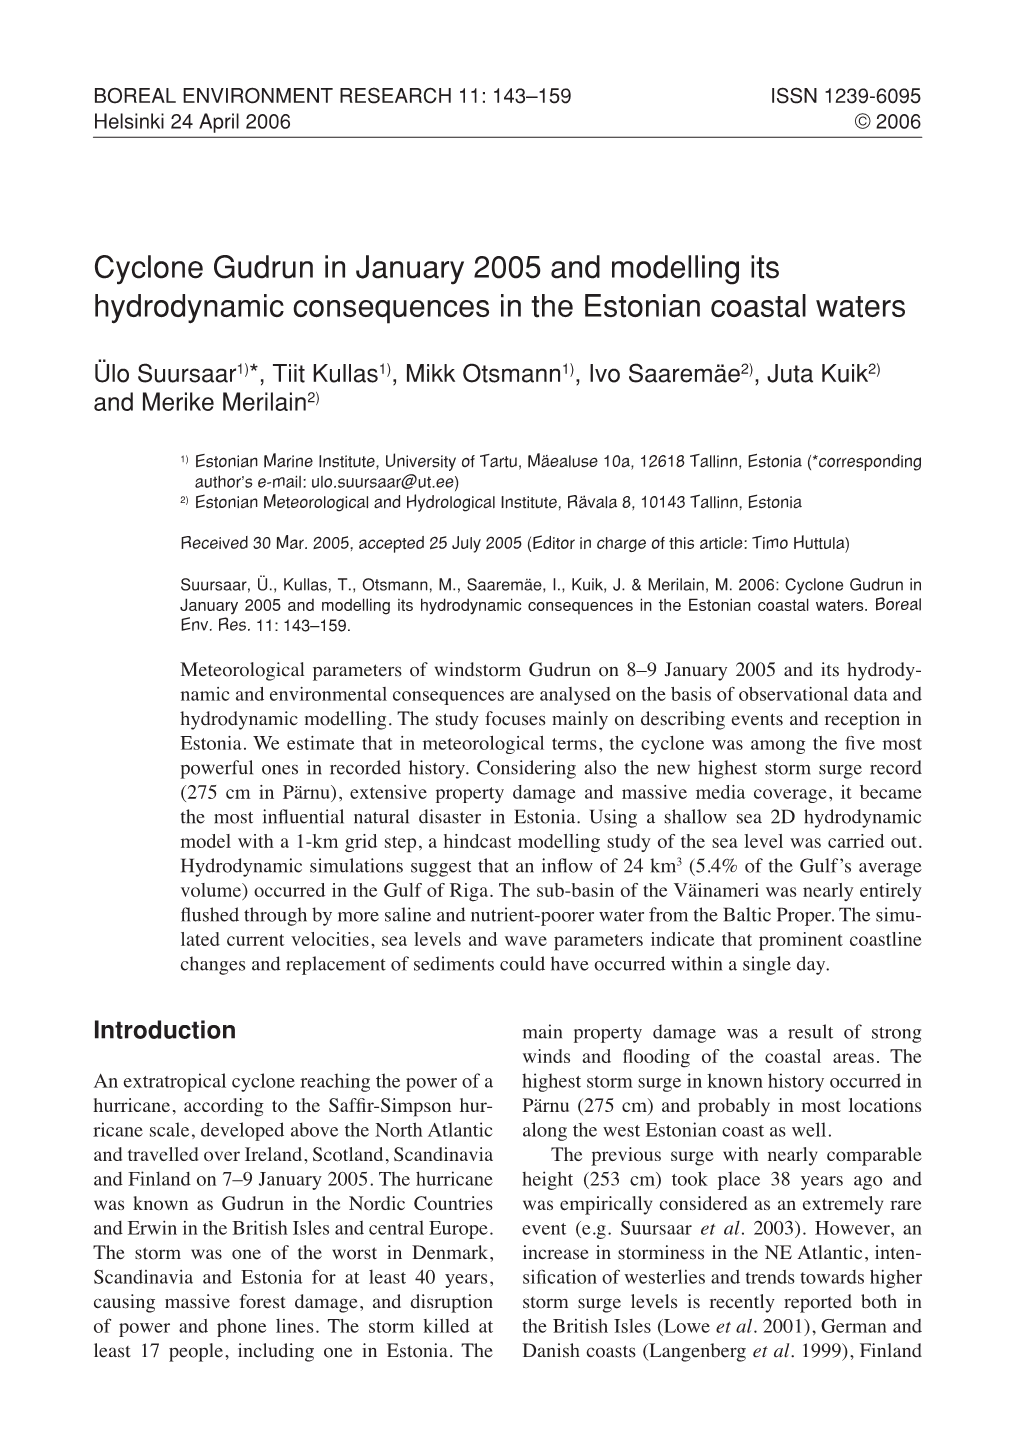 Cyclone Gudrun in January 2005 and Modelling Its Hydrodynamic Consequences in the Estonian Coastal Waters